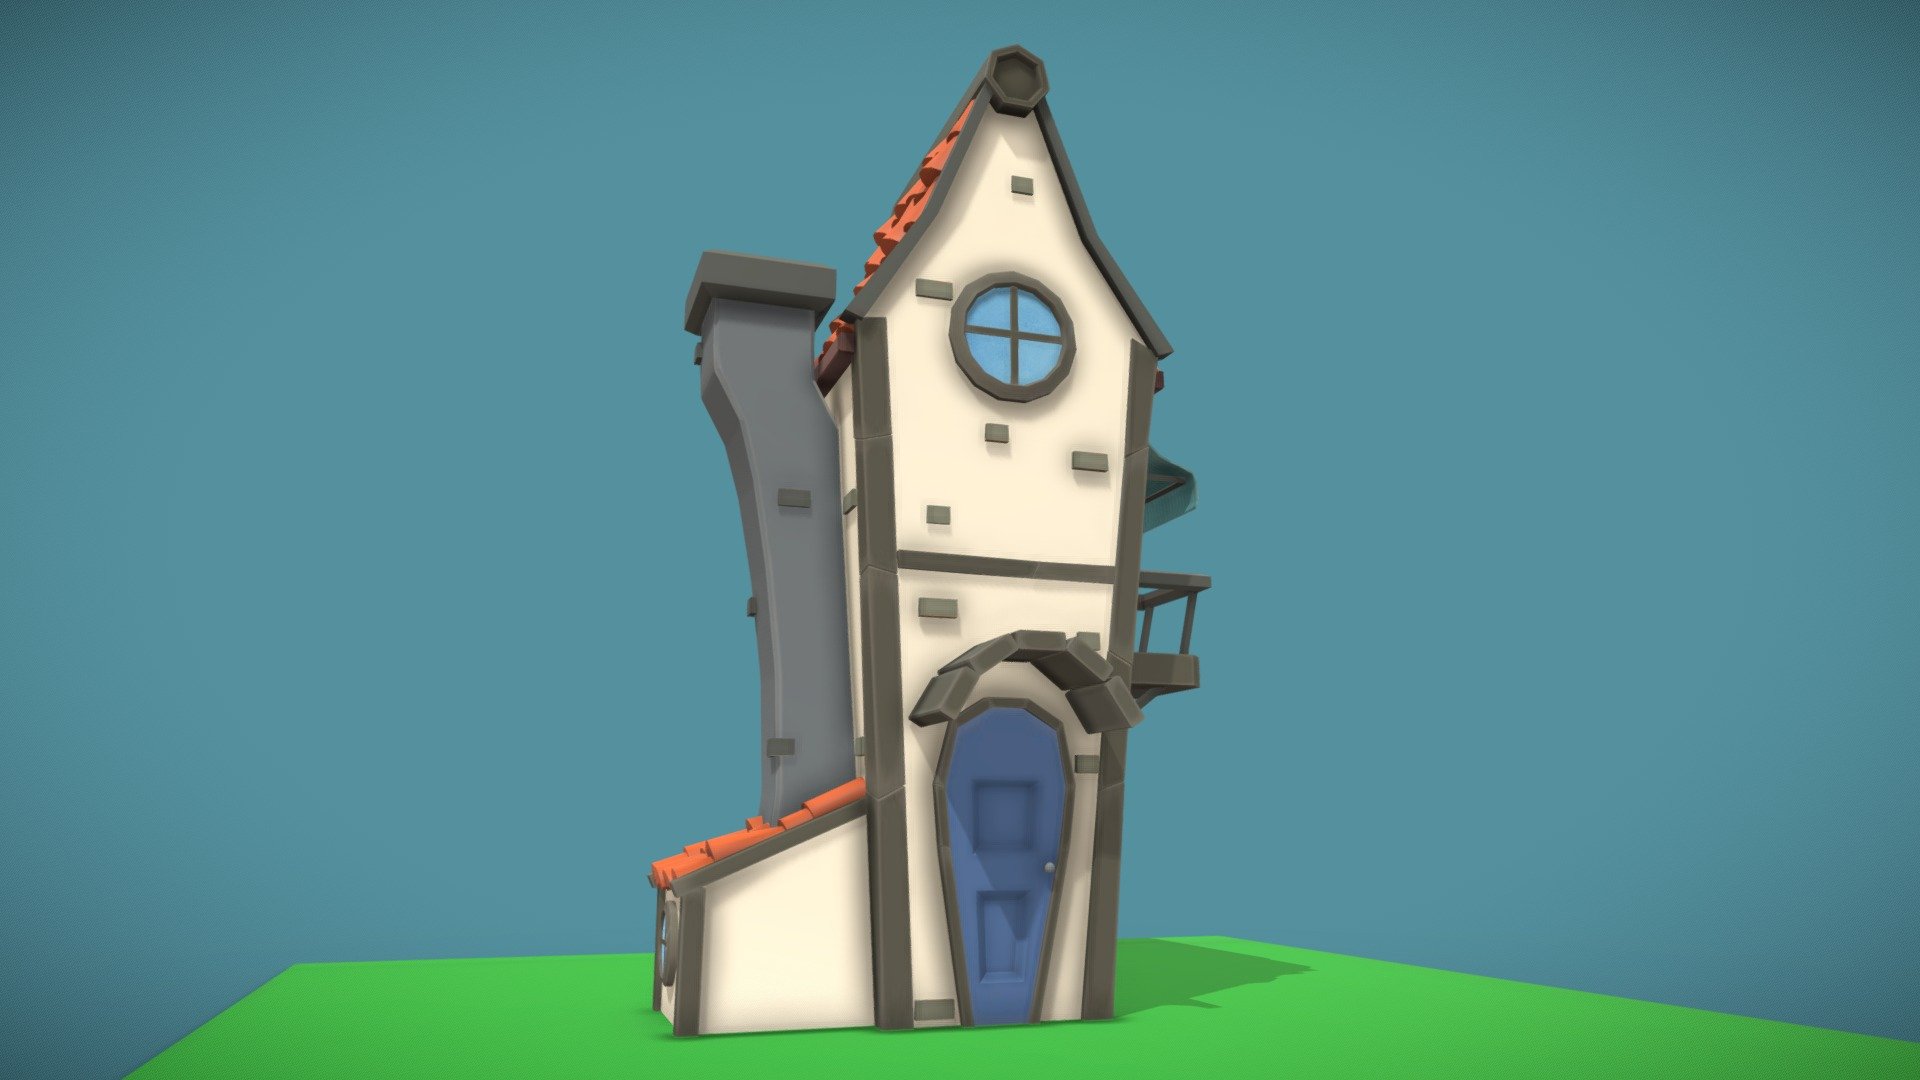 A low poly stylized house i modelled in Maya and textured in Substance Painter, took me around 6 hours to fully complete, hope you like it, any feedback is appreciated 3d model